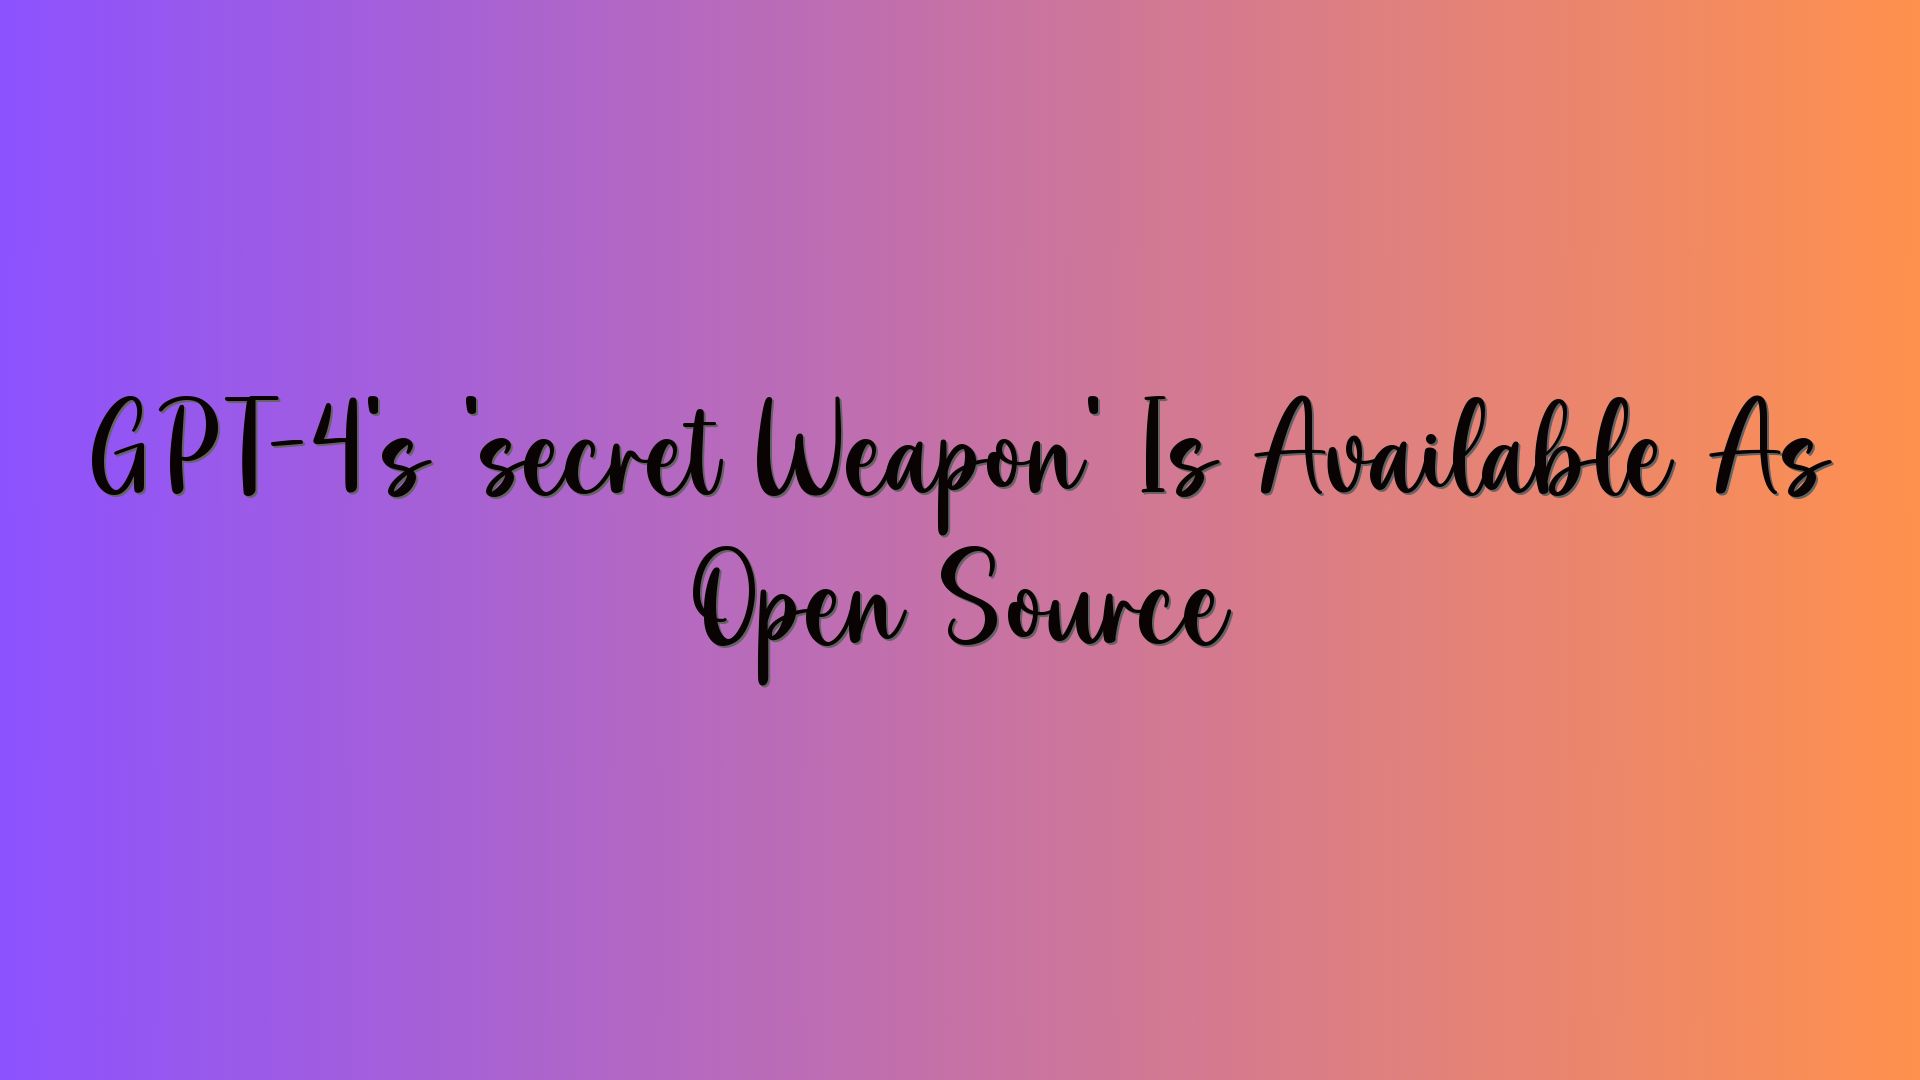 GPT-4’s ‘secret Weapon’ Is Available As Open Source